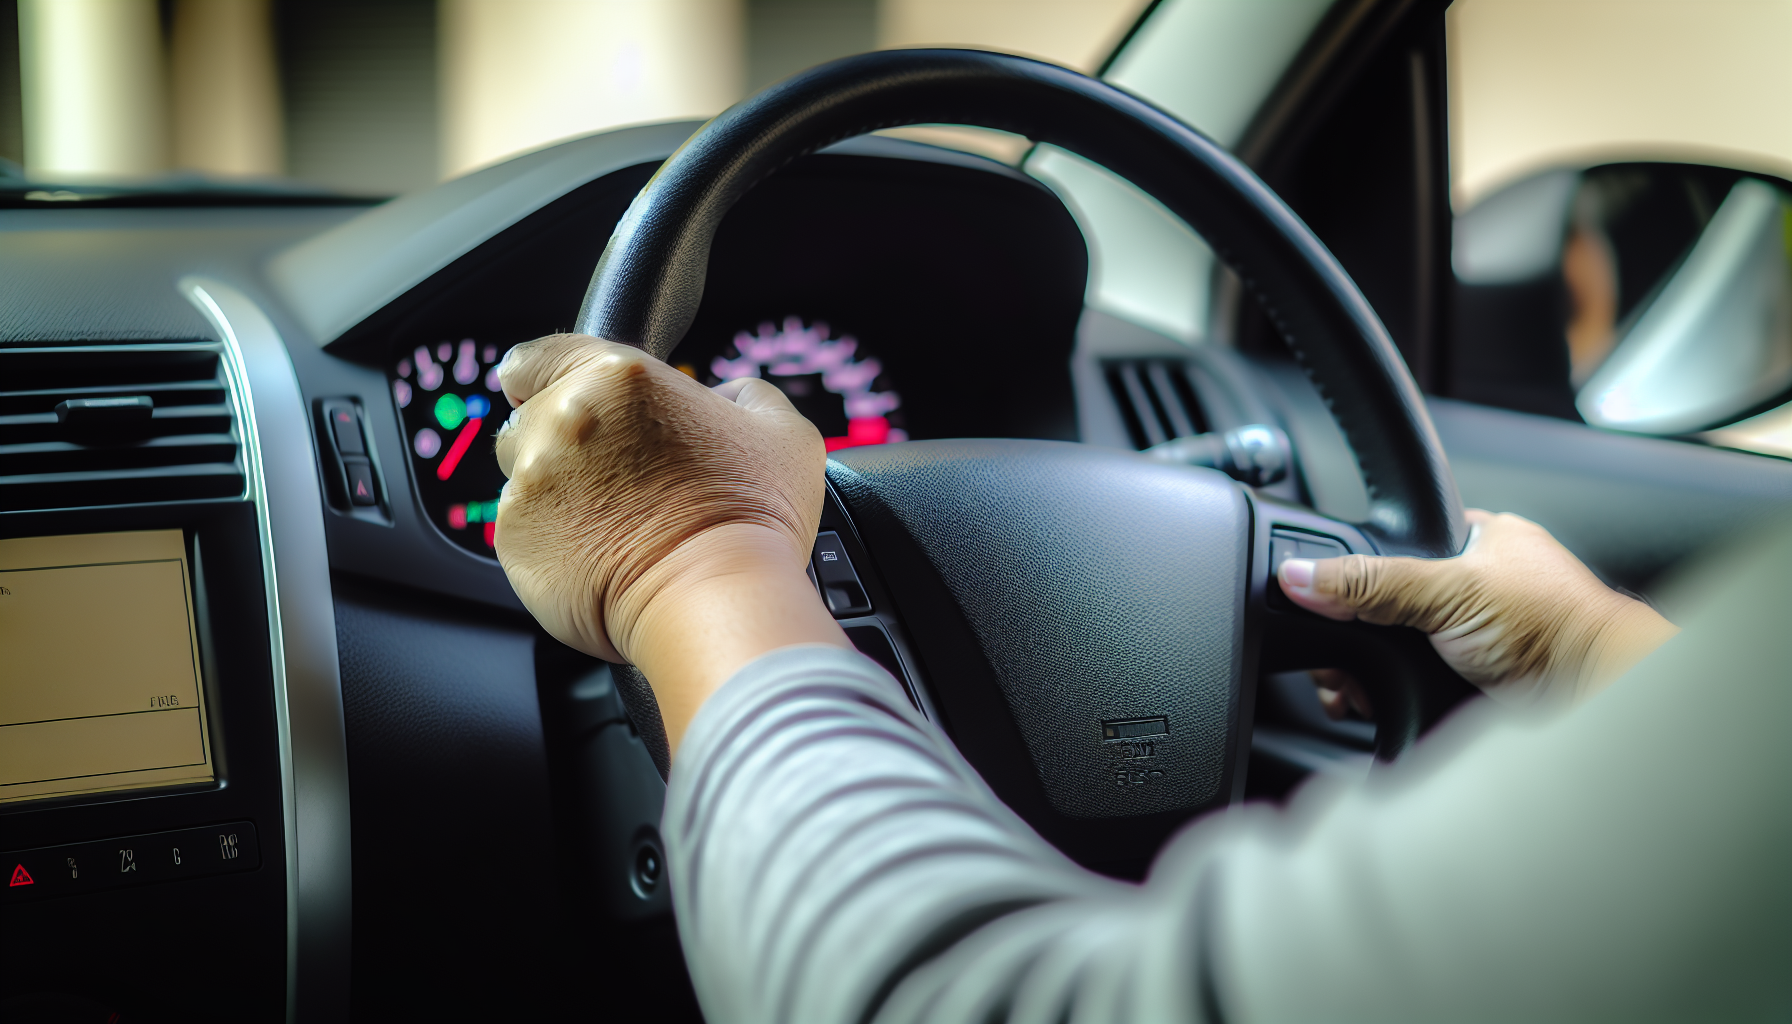 Driver's hands on a steering wheel shaking due to brake pulsation